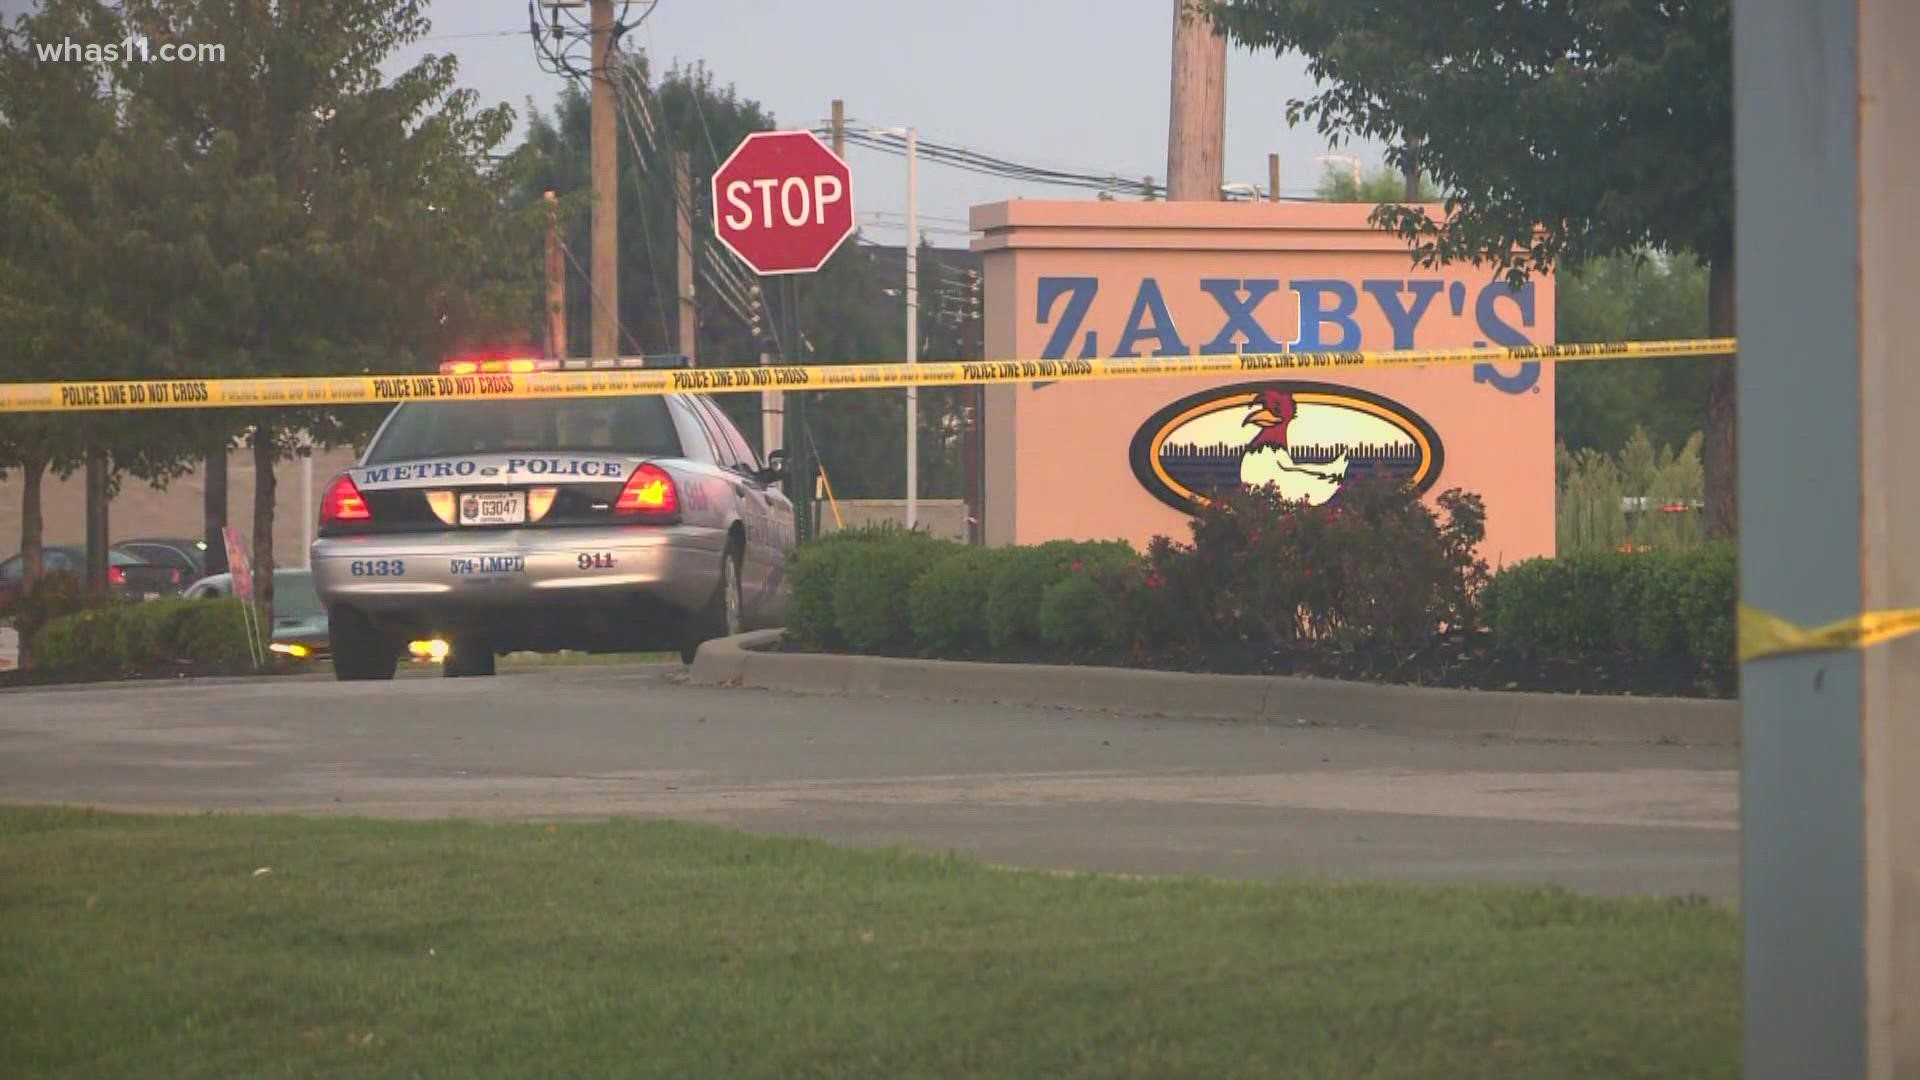 Police are investigating after a shooting in the parking lot of a Zaxby's restaurant.